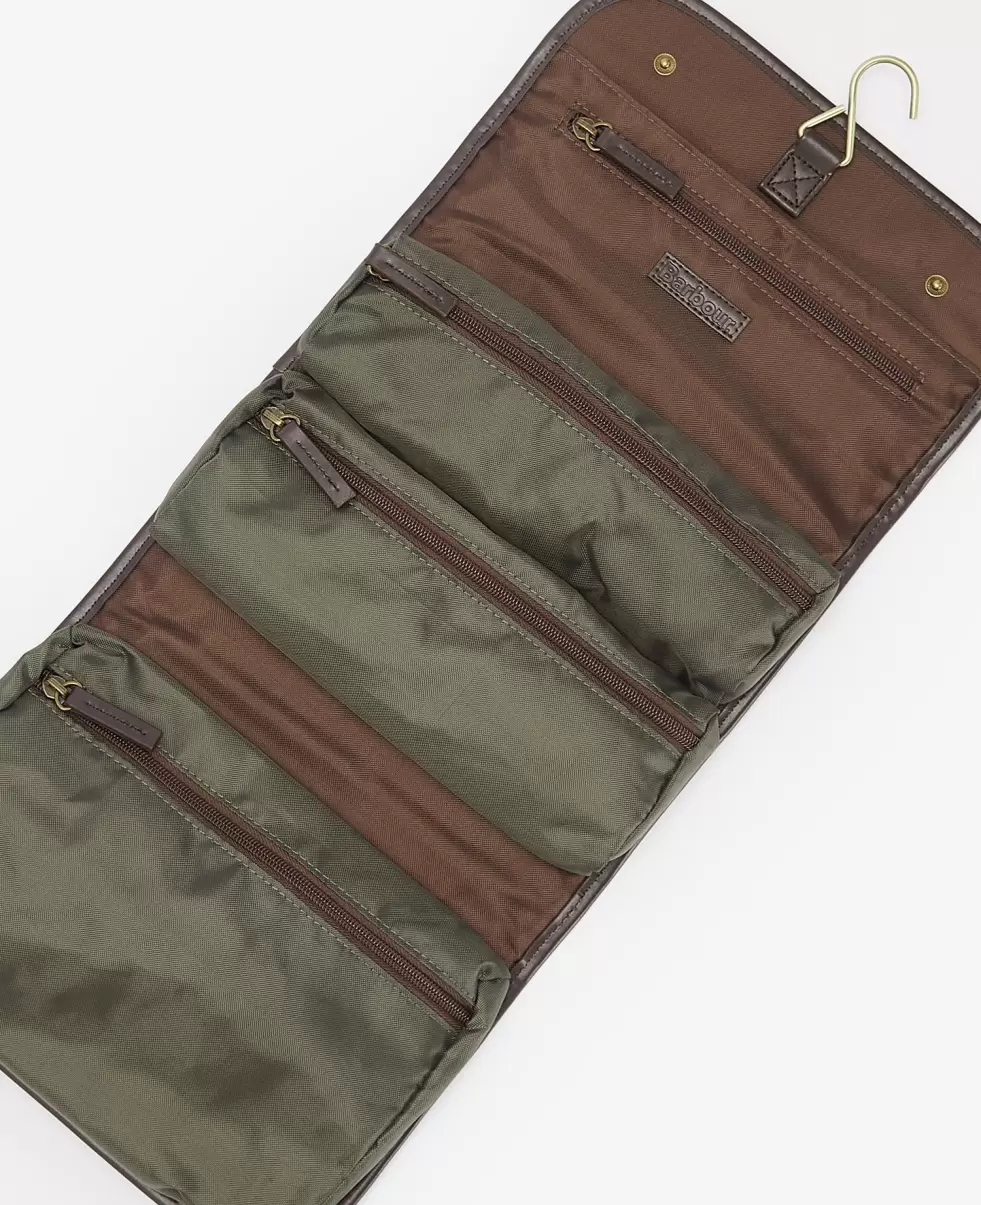 Exquisite Barbour Wax Hanging Washbag Accessories Bags & Luggage Olive - 2